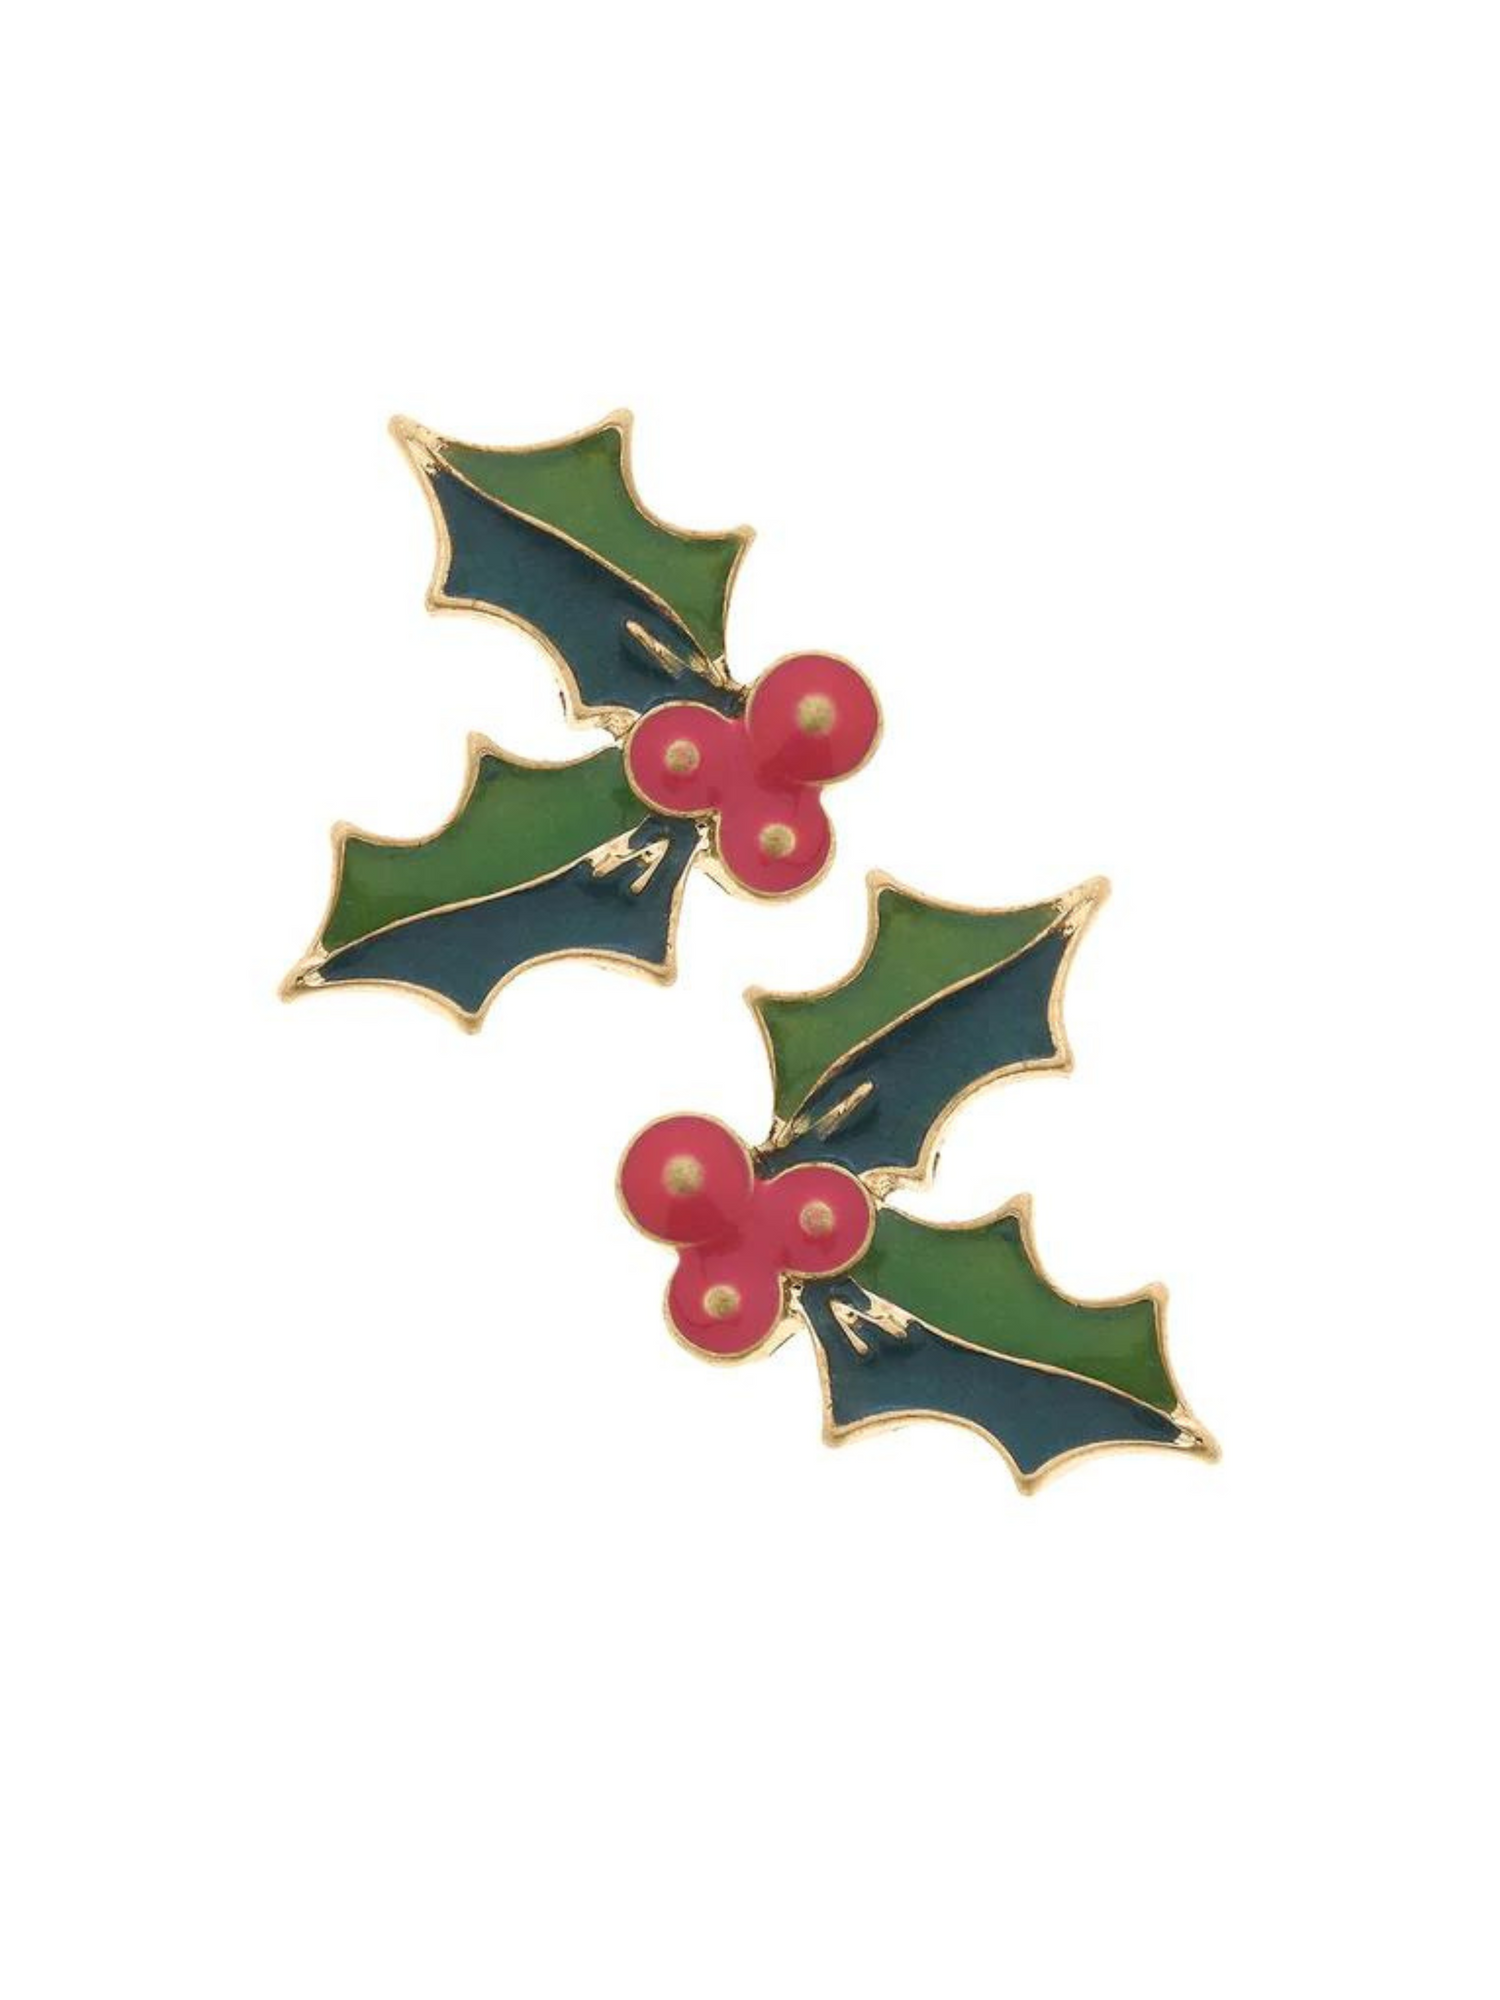 FESTIVE CANVAS STYLE HOLLY STUD EARRINGS - THE HIP EAGLE BOUTIQUE